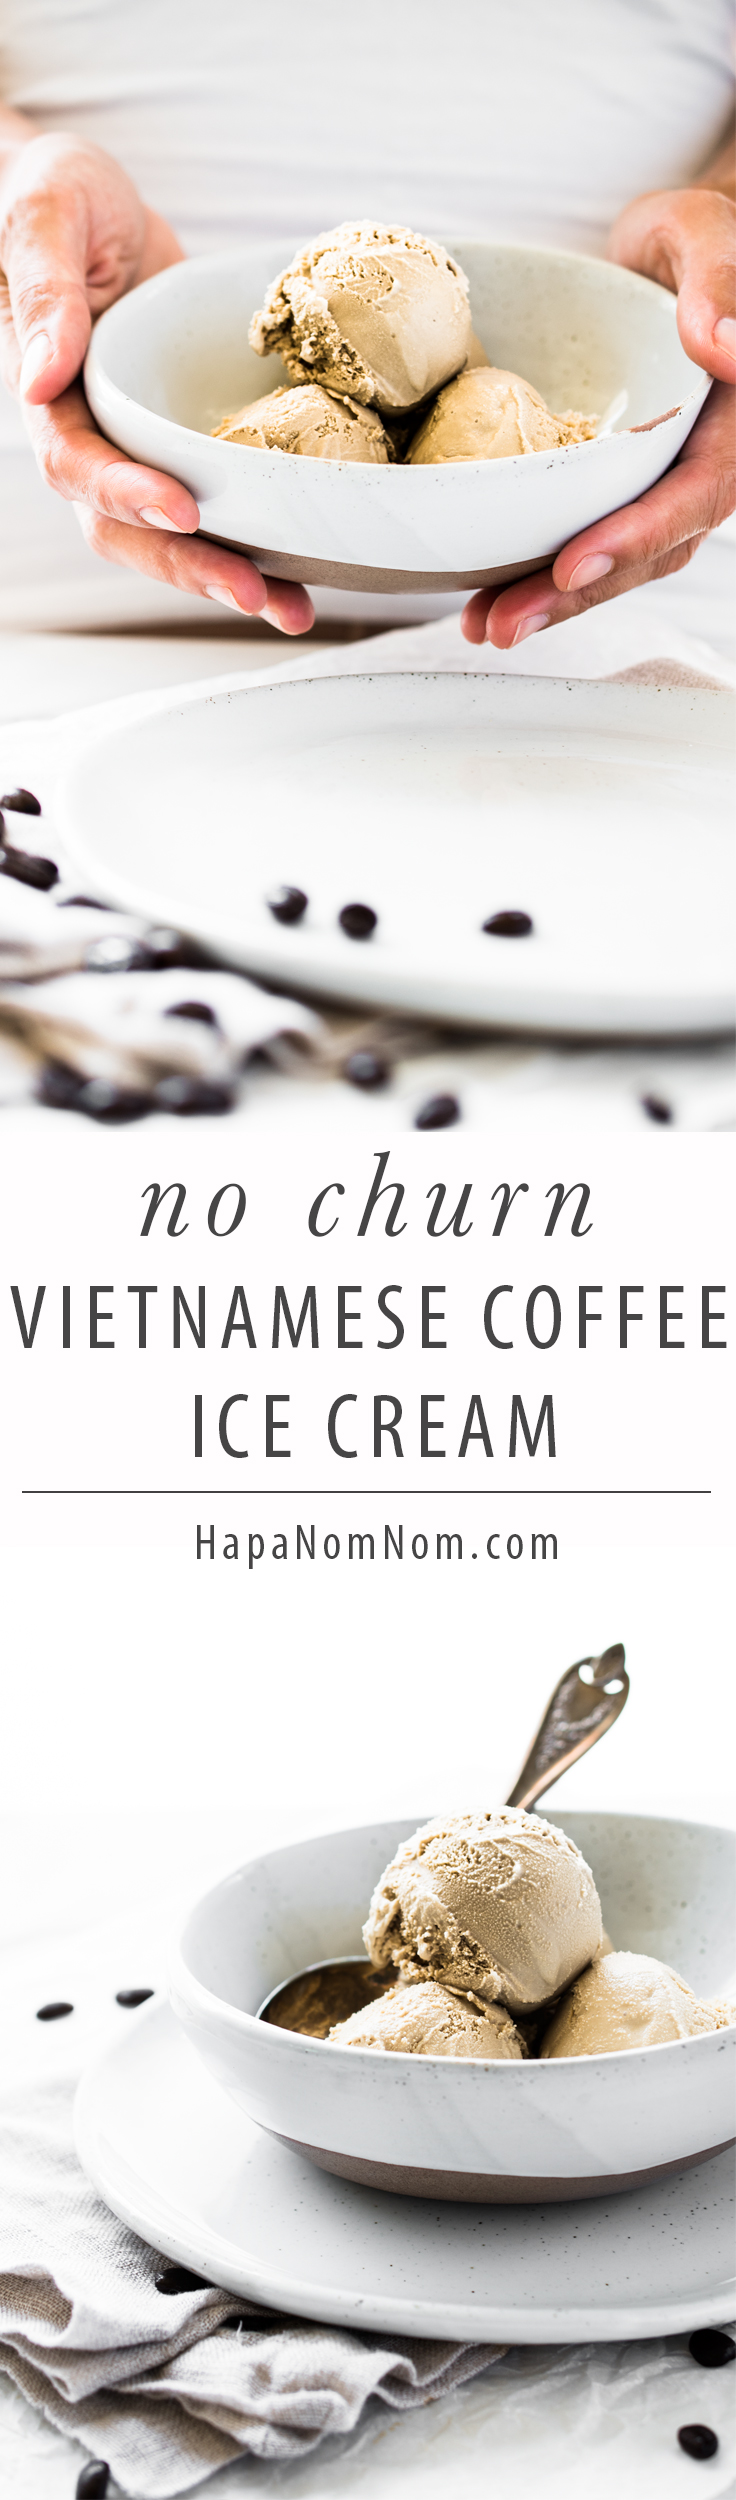 Vietnamese Iced Coffee is fantastic - hot day or otherwise! Now imagine that sweet and creamy beverage made into ice cream. What makes this even better?  NO expensive, counter --cluttering piece of equipment needed!